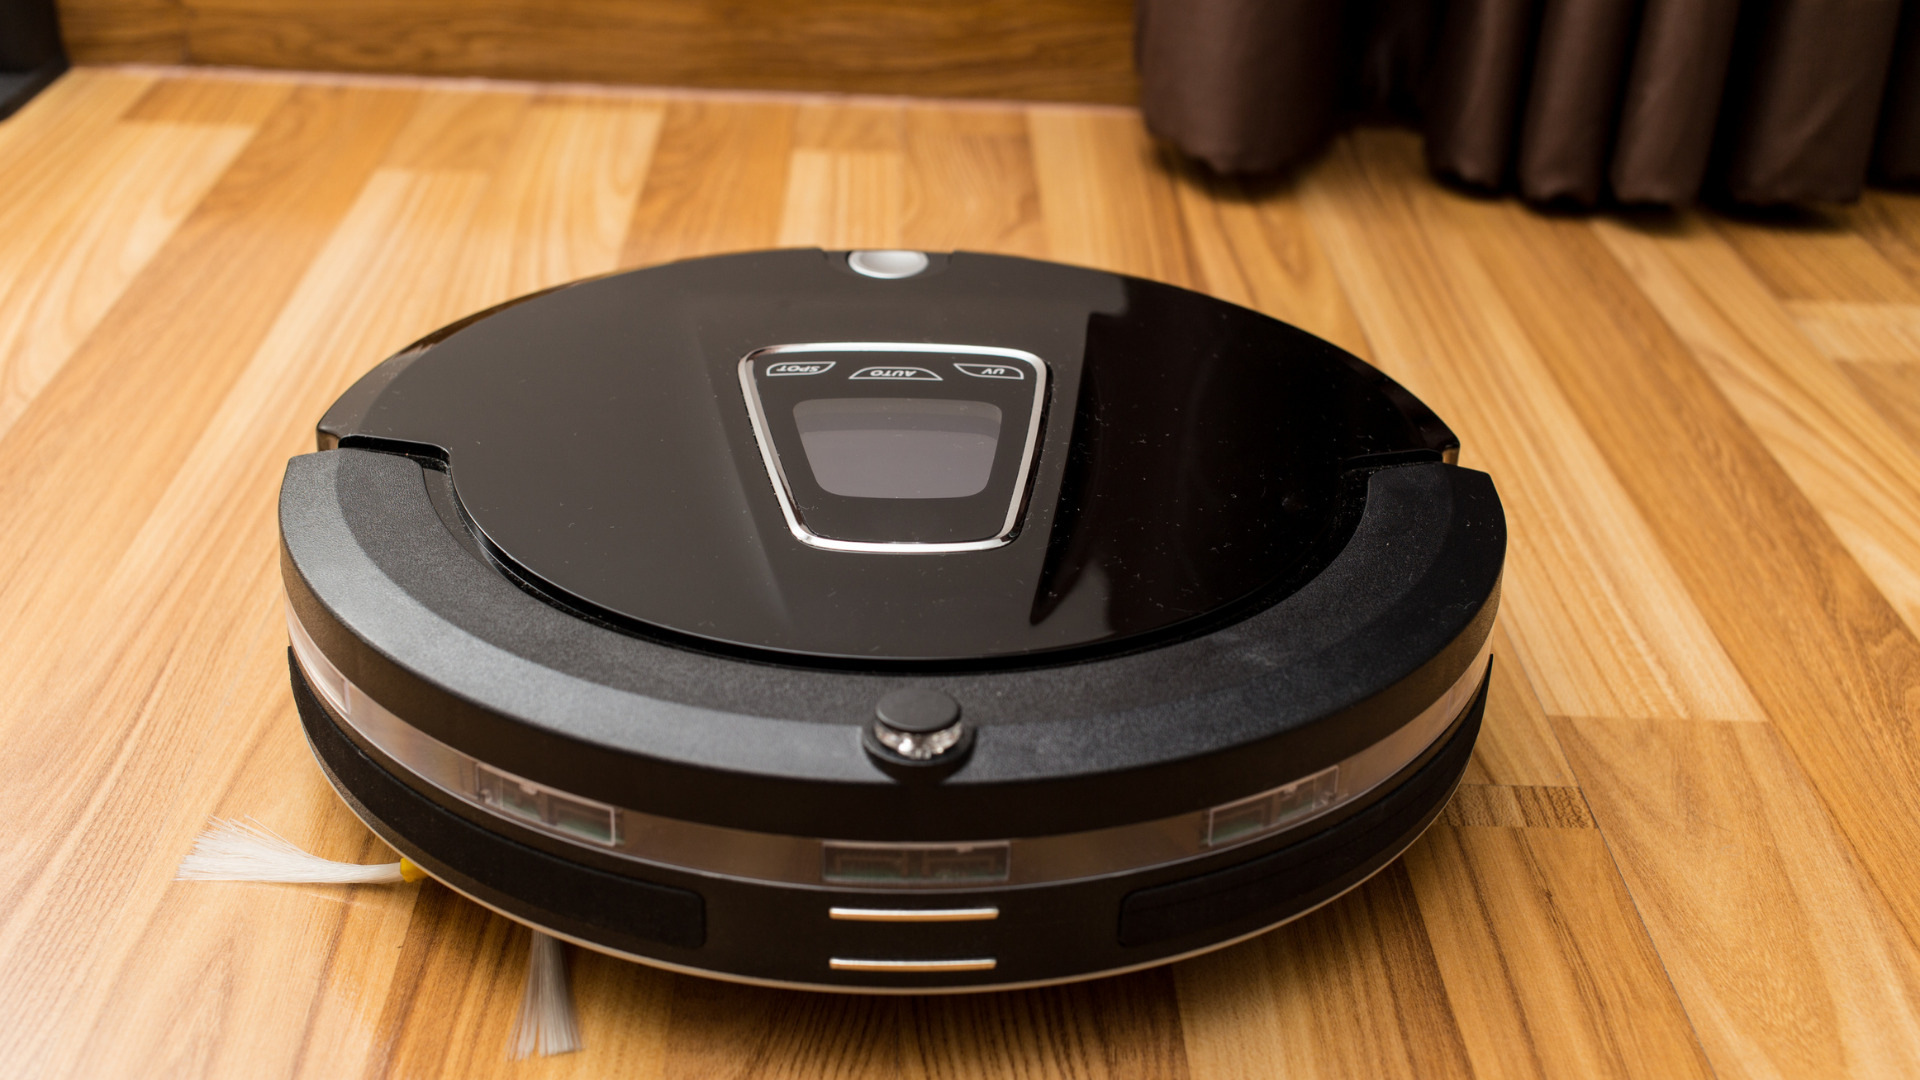 The advantages of a robot vacuum cleaner